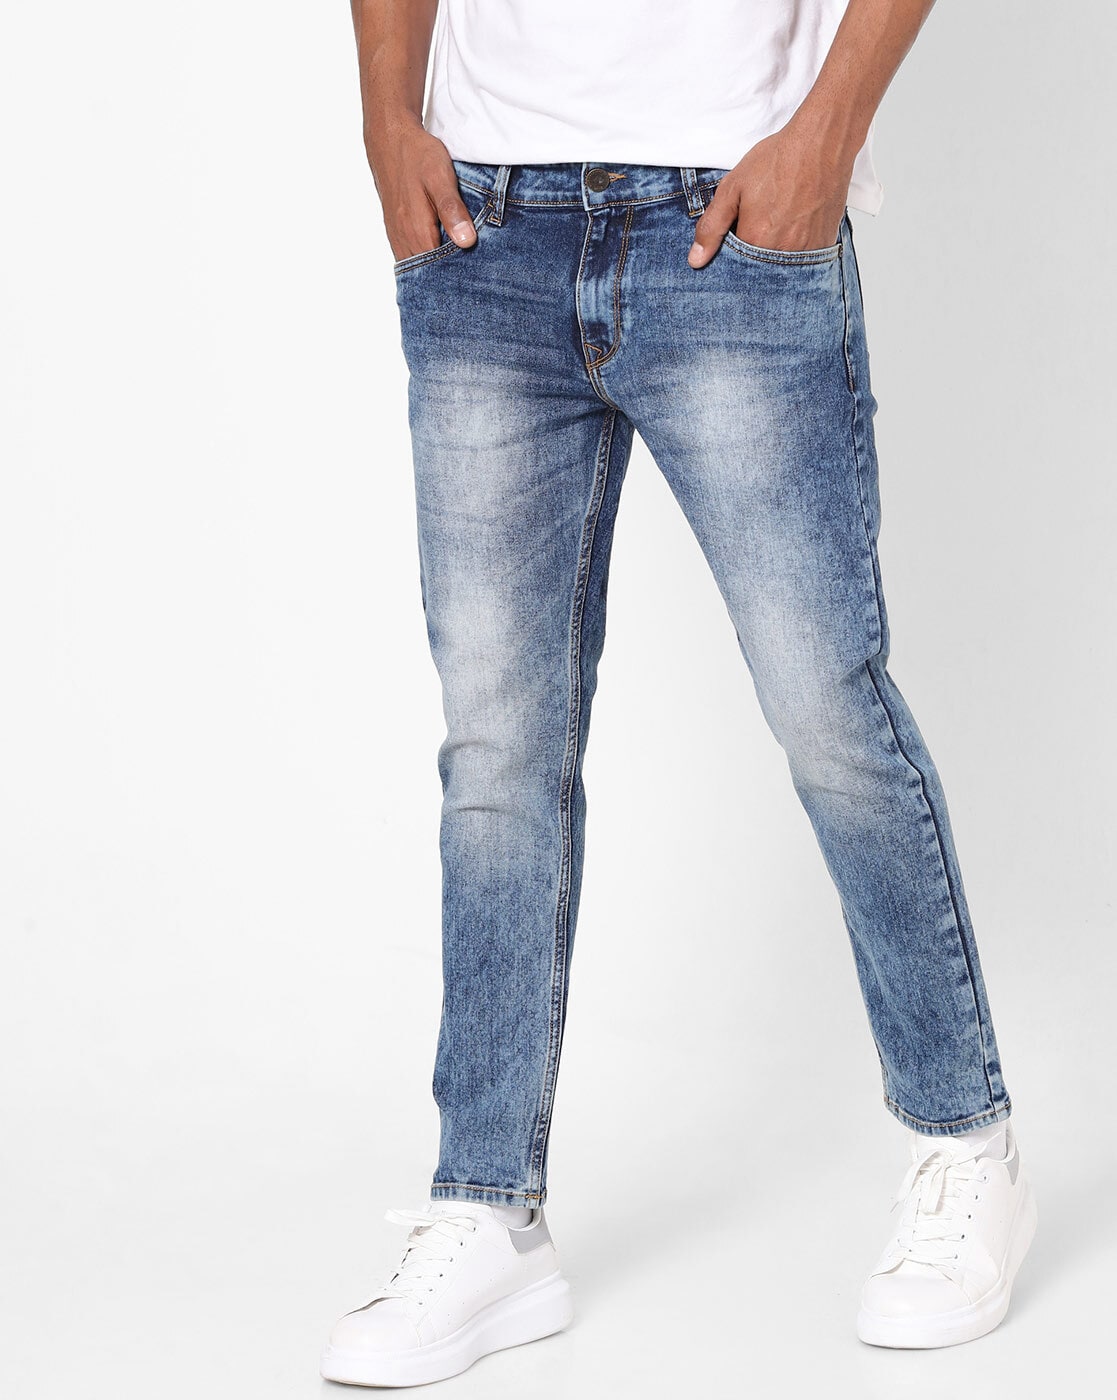 Selected Homme Jeans In Tapered Fit With Cropped Leg  Blue  Cropped jeans  men Mens jeans fit White jeans men